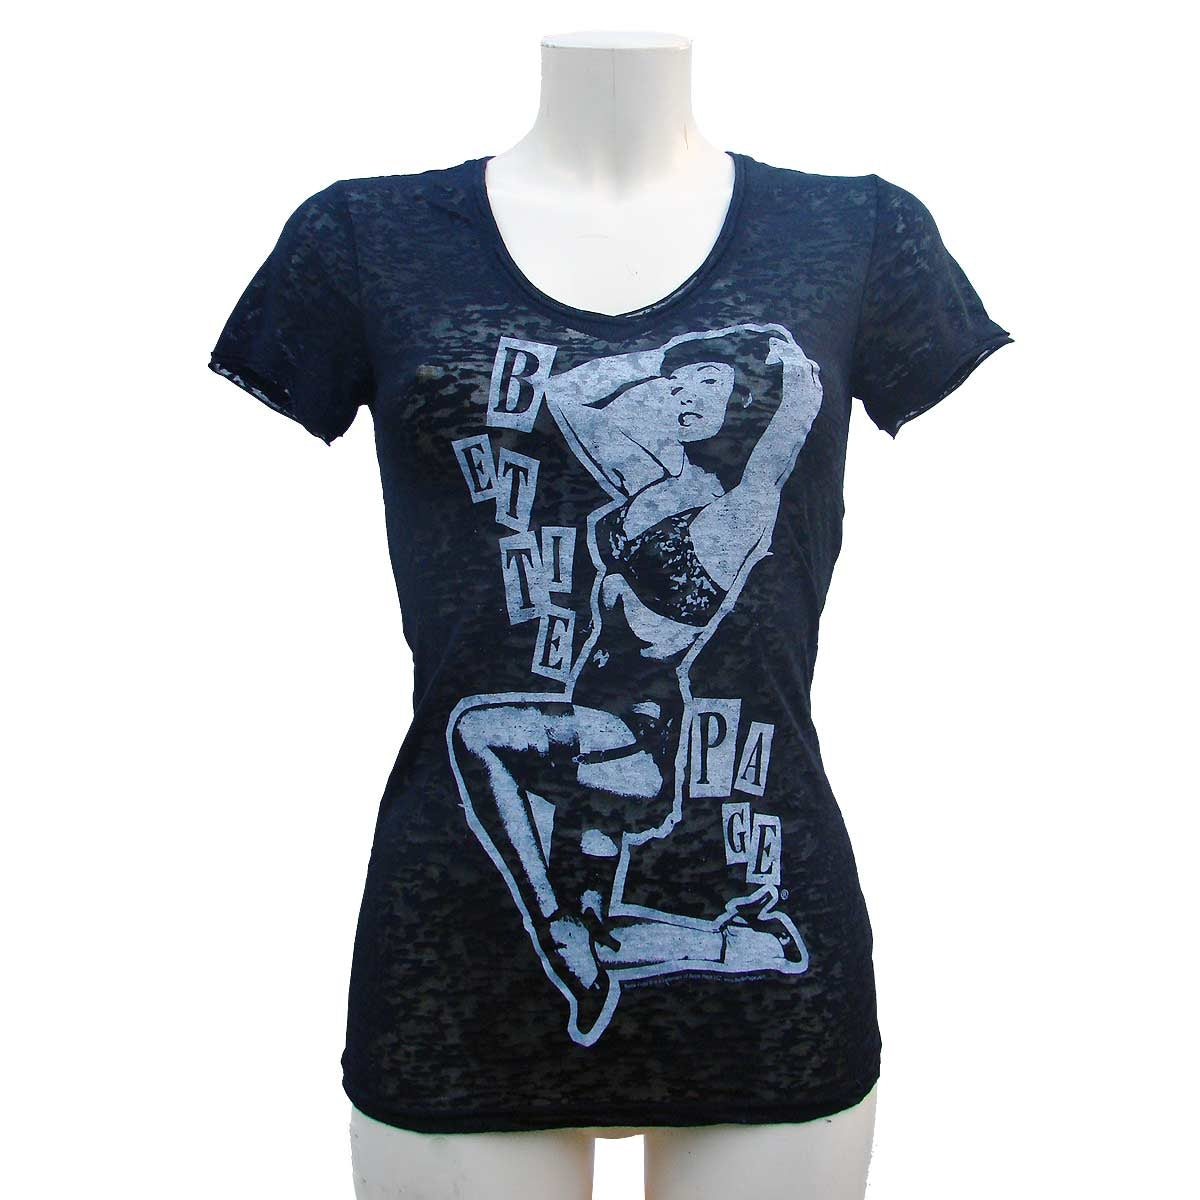 Woman T-shirt in black transparency Burnout Bettie Page